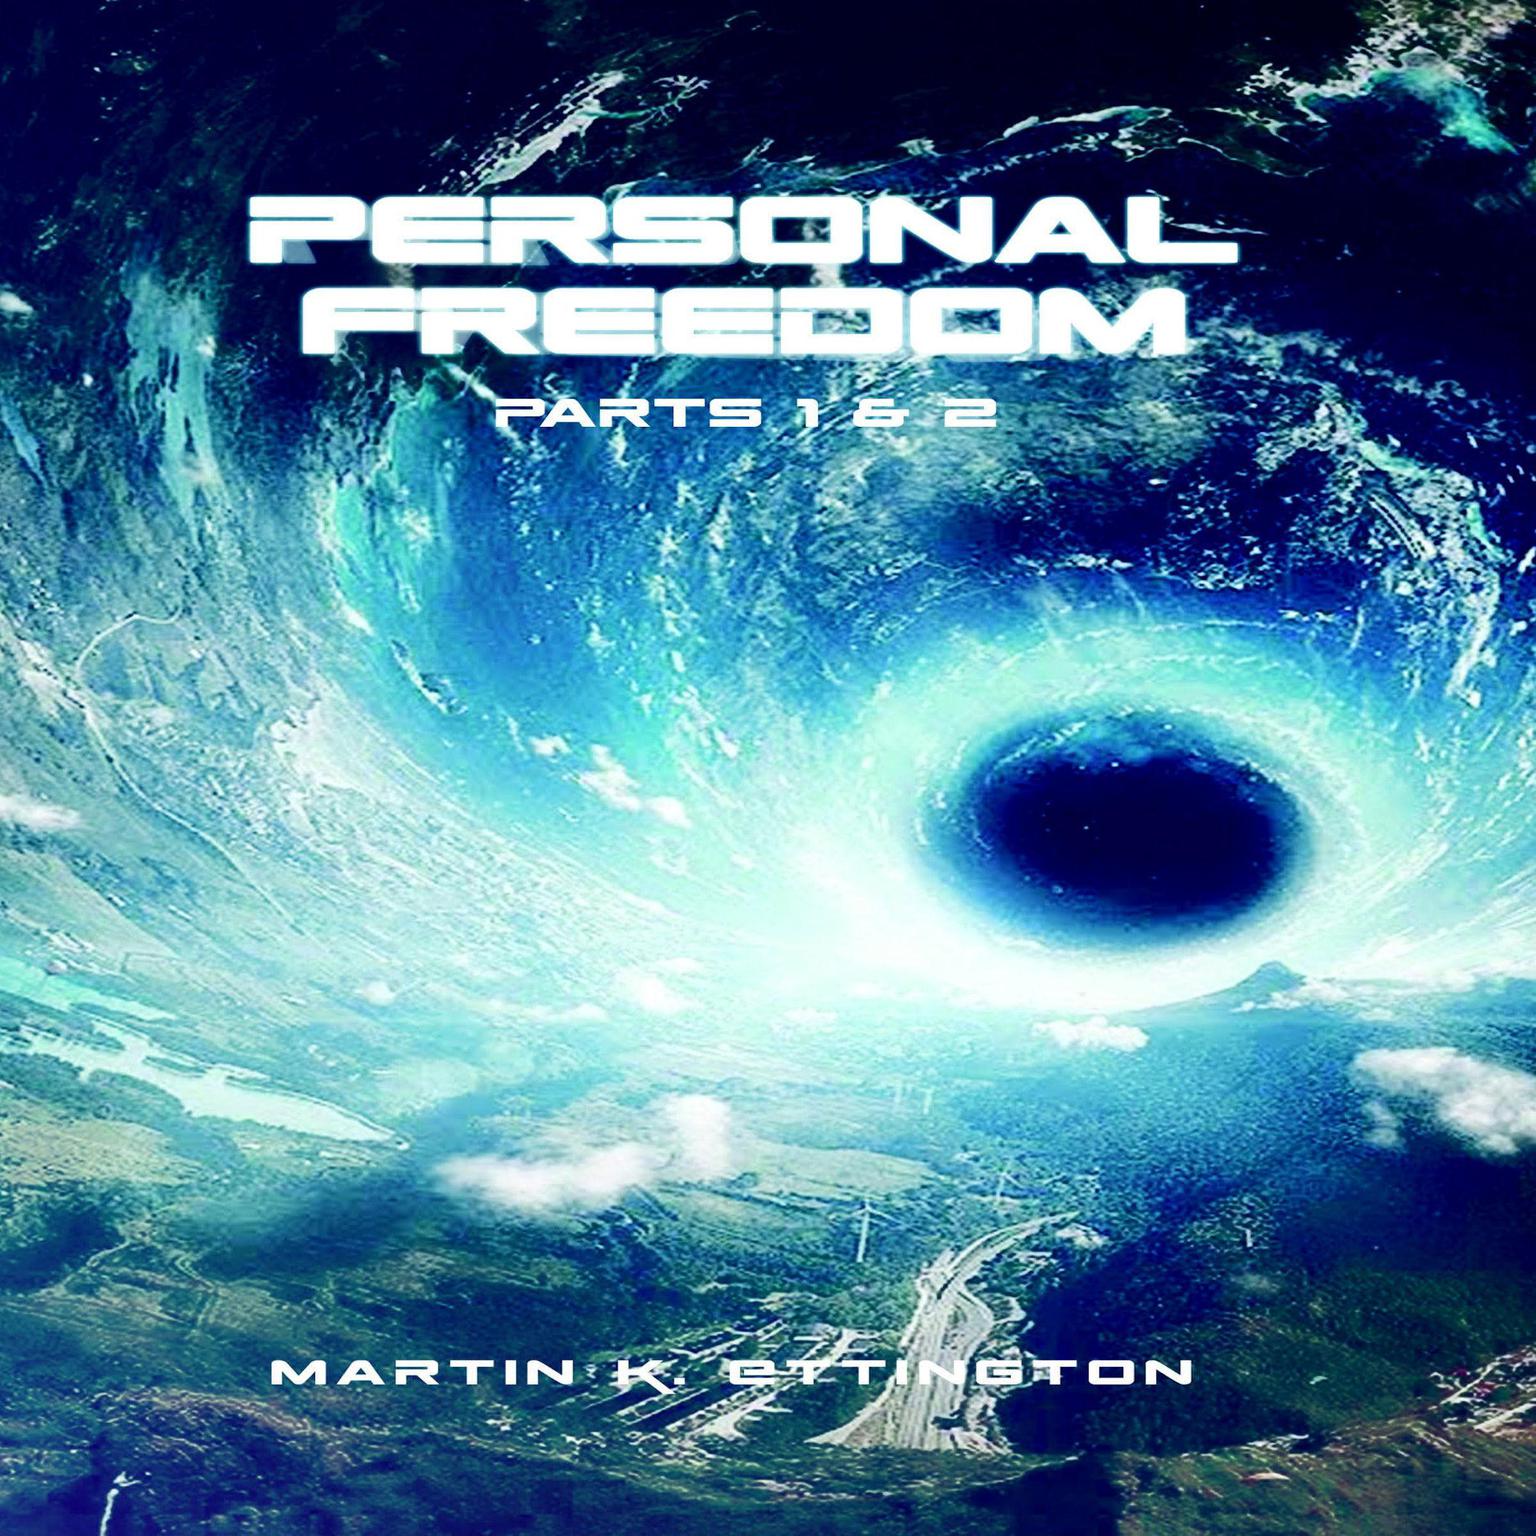 Personal Freedom Parts 1 & 2: A Habitat in Space & A Trip to the Stars Audiobook, by Martin K. Ettington